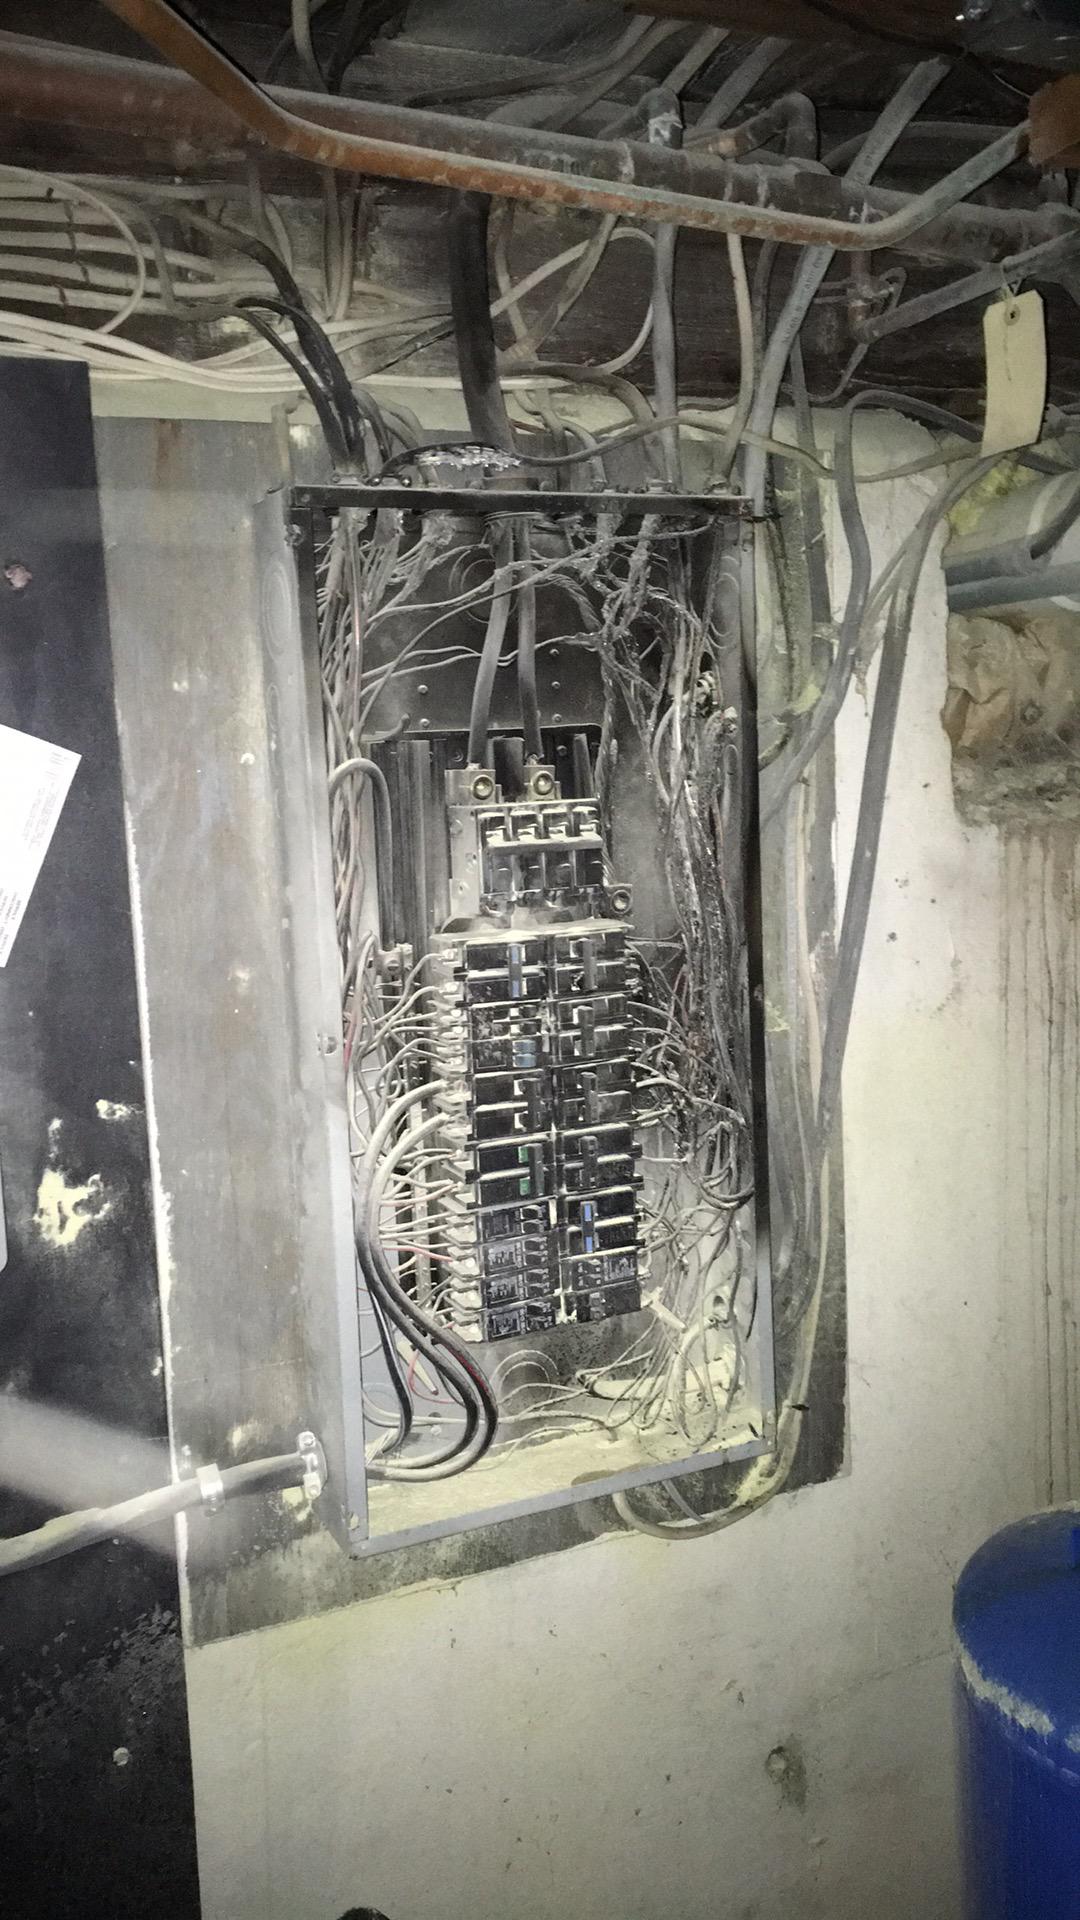 Electrical Panel - Fire Source